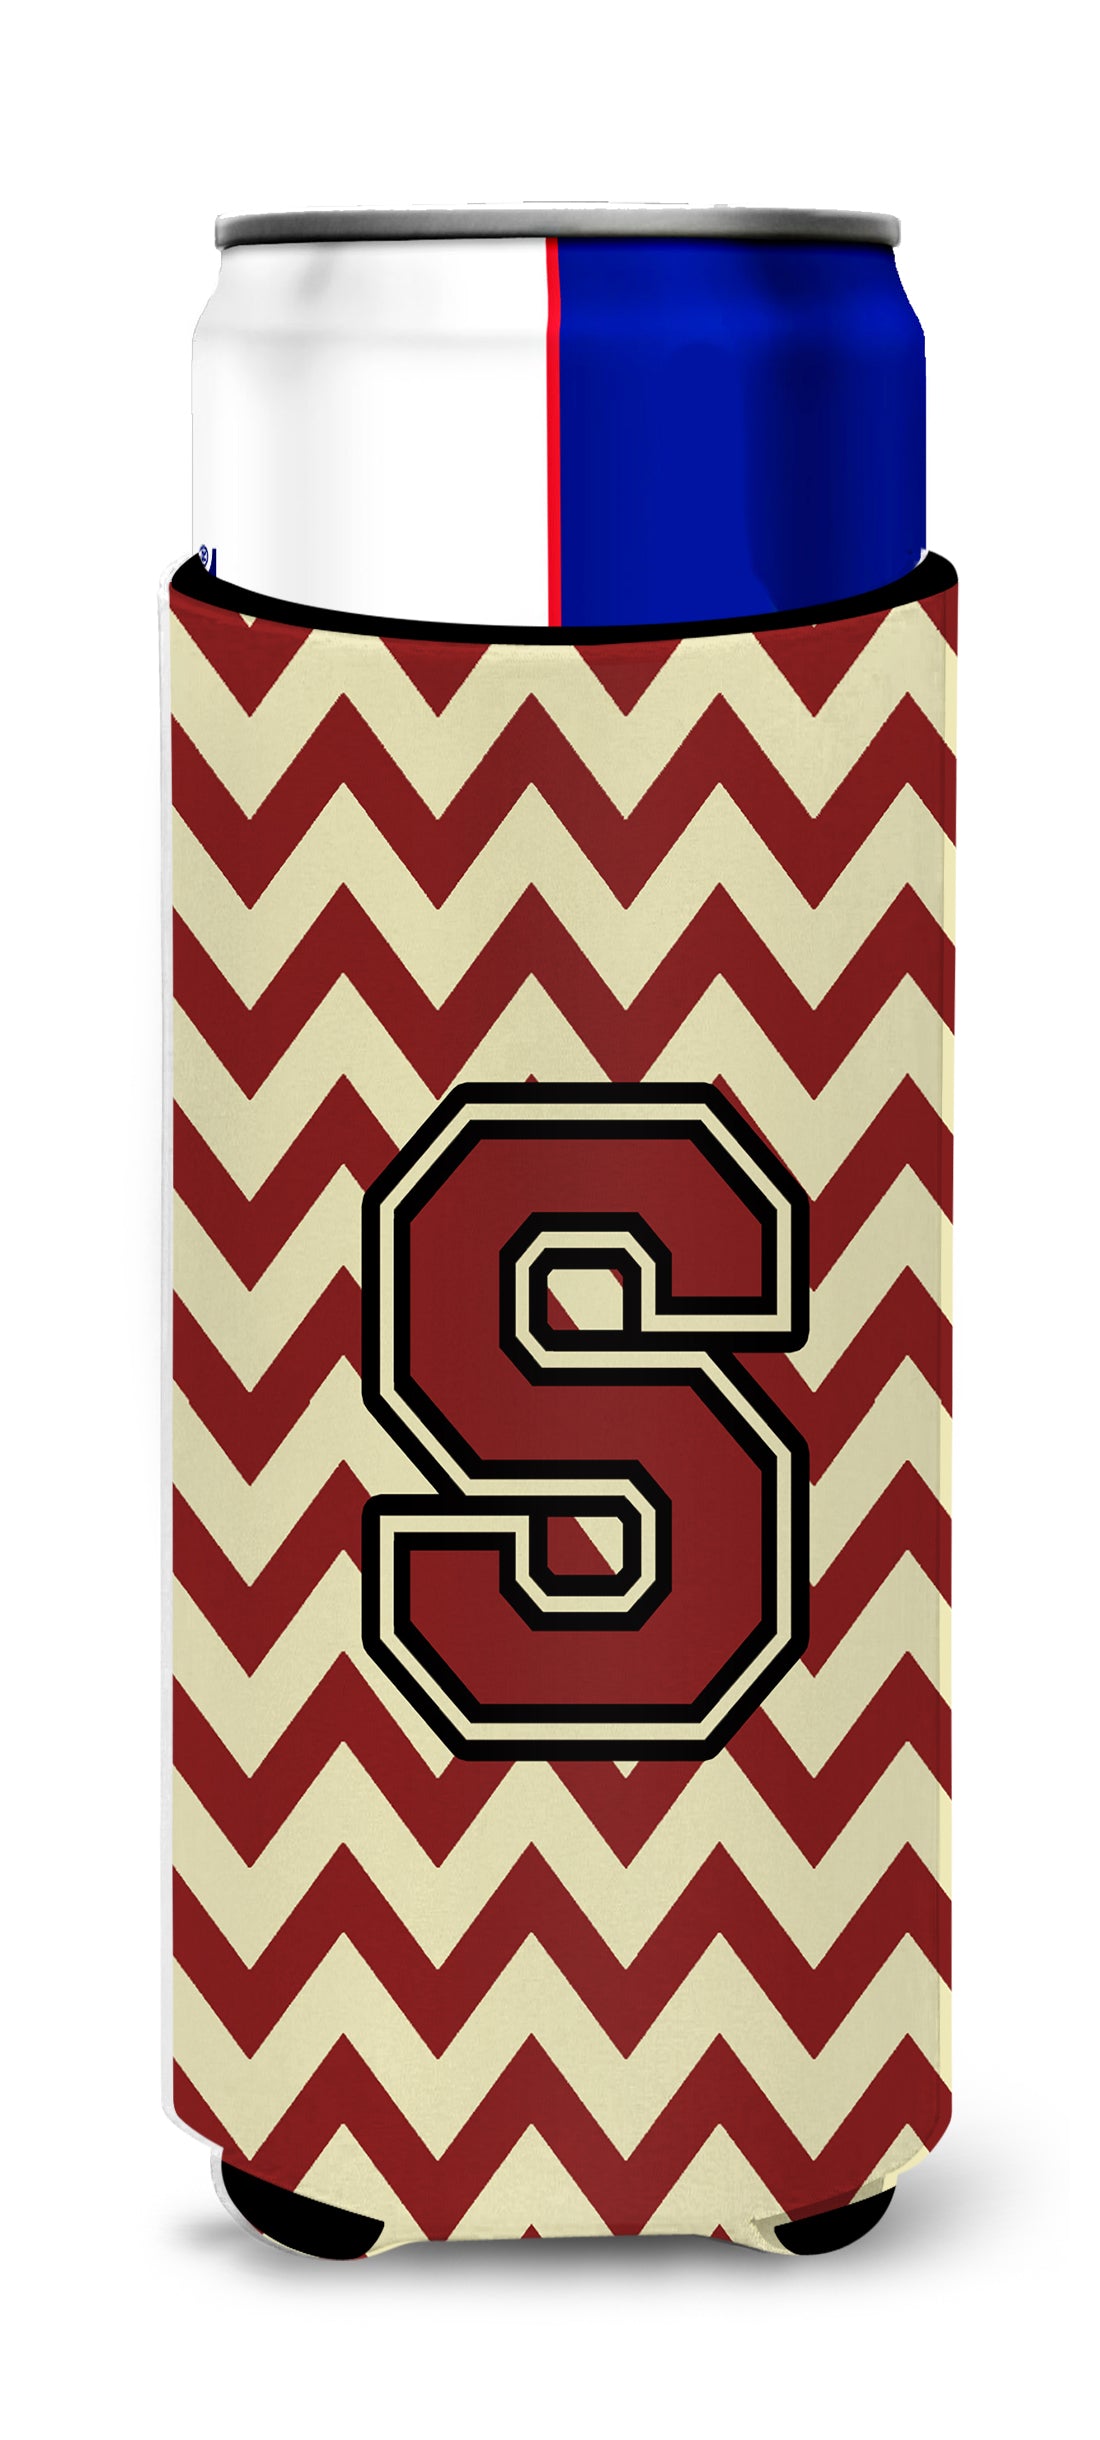 Letter S Chevron Maroon and Gold Ultra Beverage Insulators for slim cans CJ1061-SMUK.